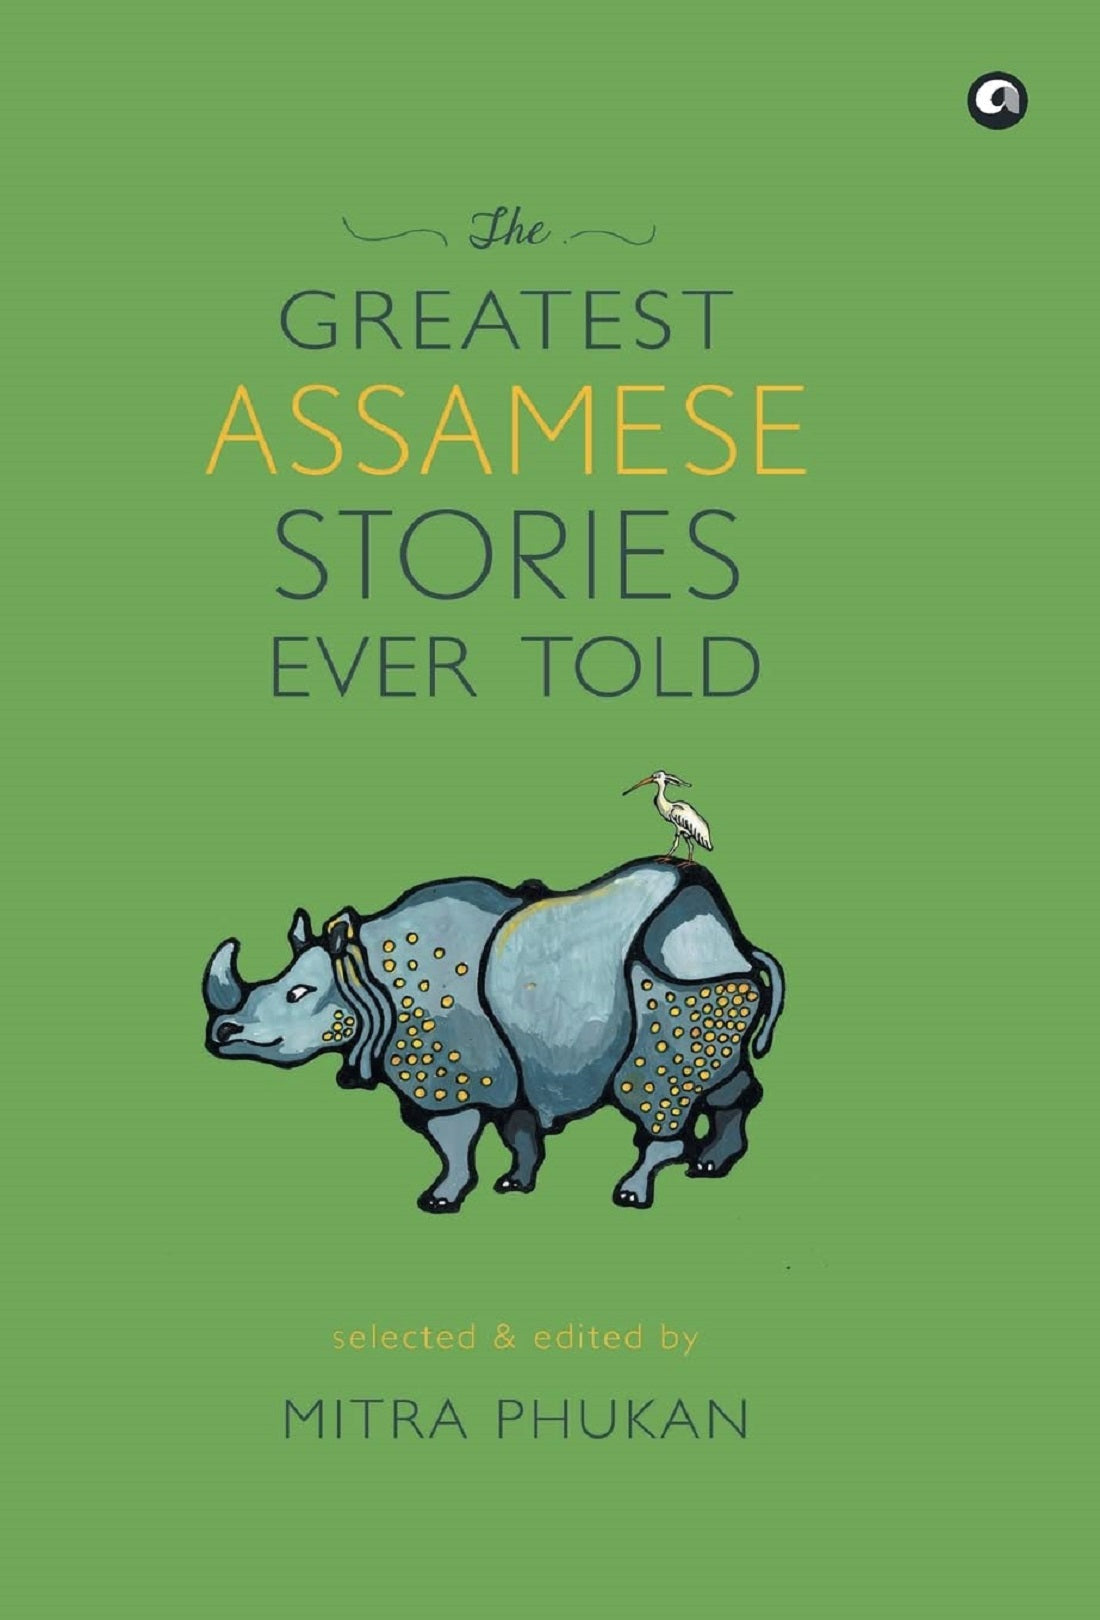 THE GREATEST ASSAMESE STORIES EVER TOLD